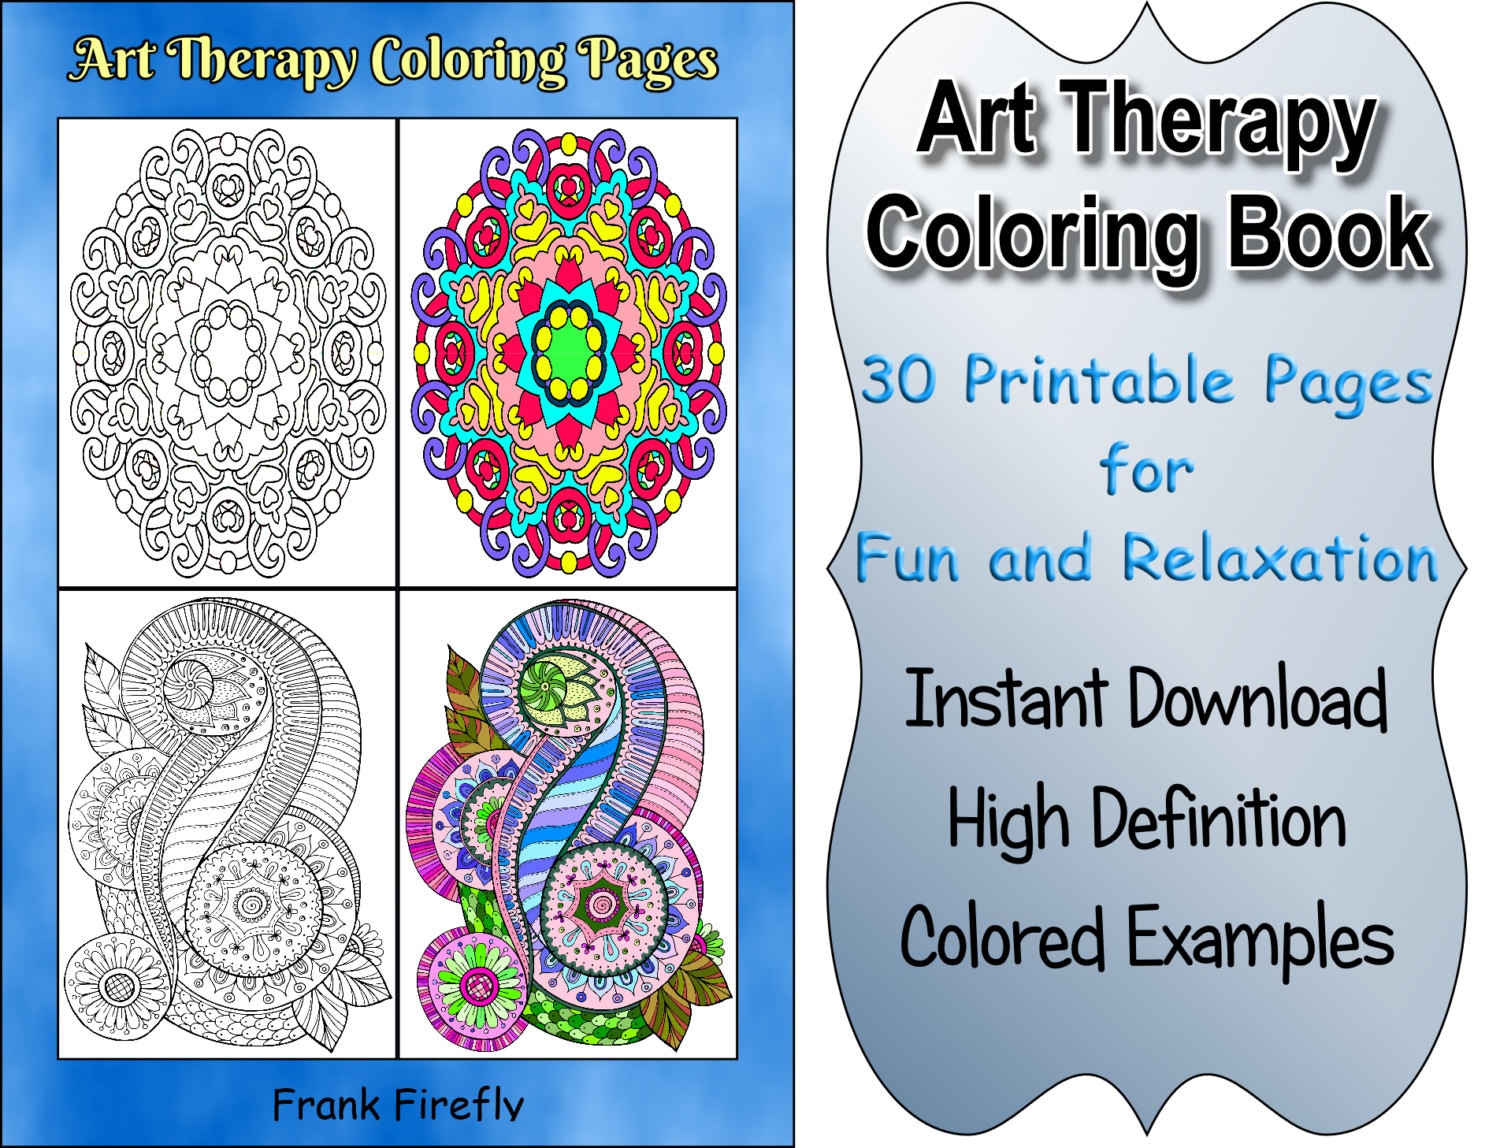 Art Therapy Coloring Book 30 Printable Coloring Pages